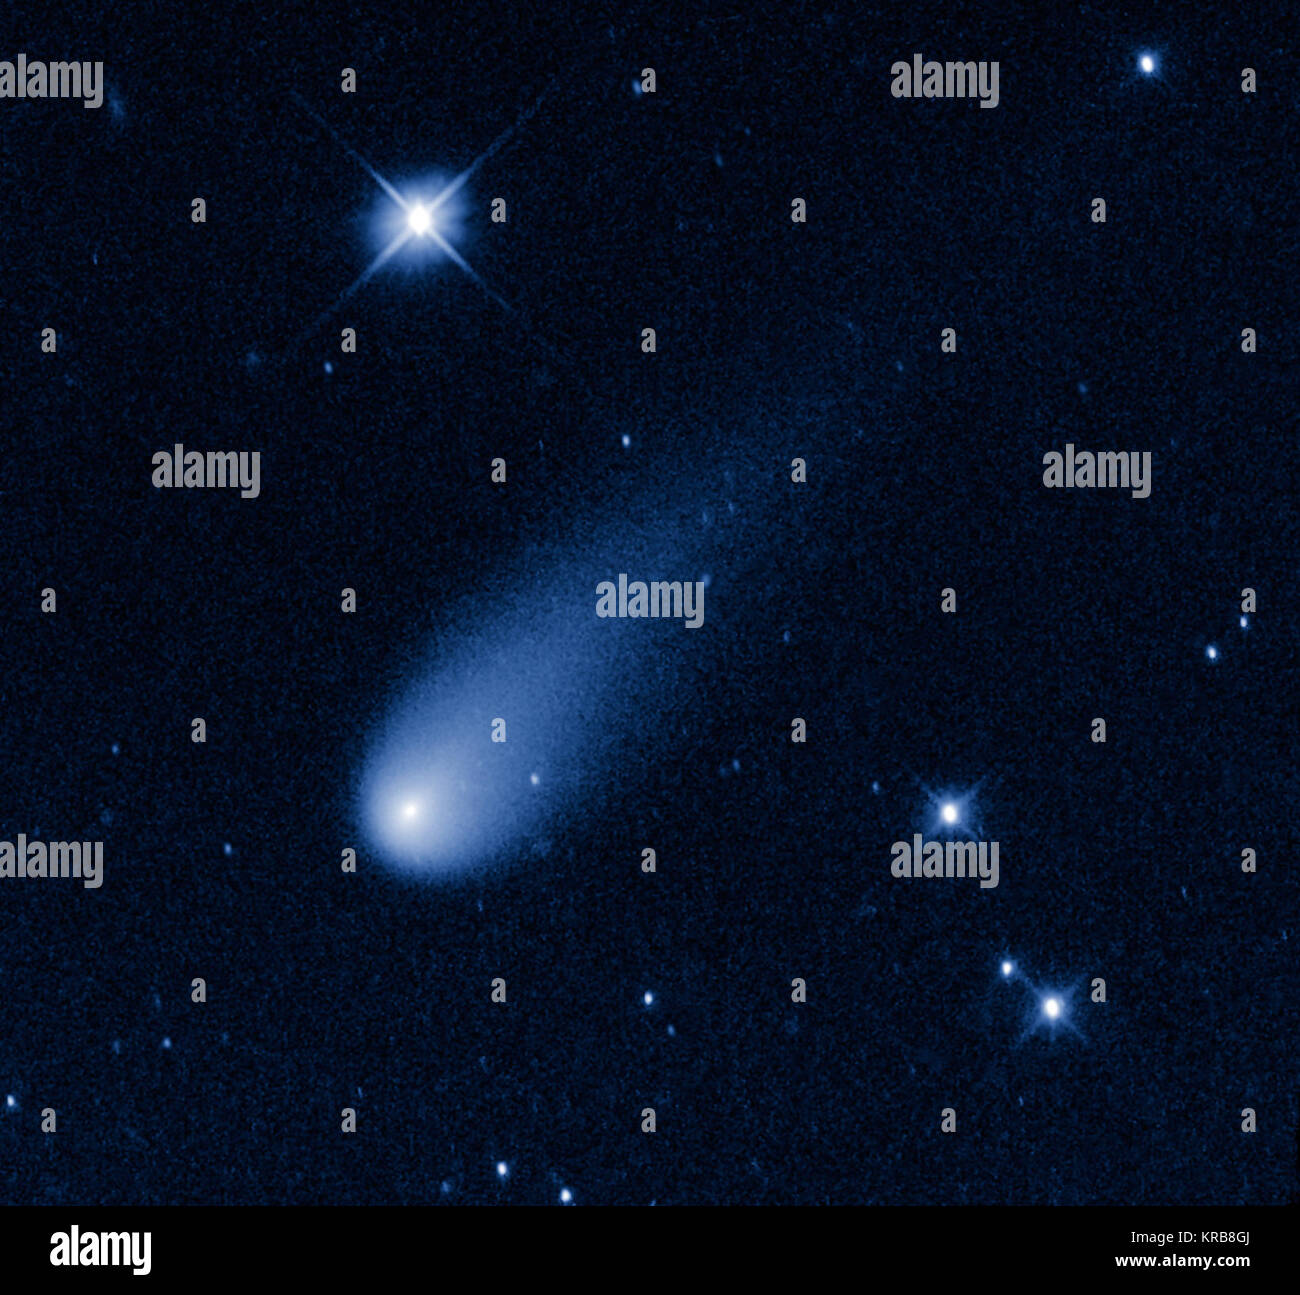 Superficially resembling a skyrocket, Comet ISON is hurtling toward the Sun at a whopping 48,000 miles per hour. Its swift motion is captured in this image taken May 8, 2013, by NASA's Hubble Space Telescope. At the time the image was taken, the comet was 403 million miles from Earth, between the orbits of Mars and Jupiter. Unlike a firework, the comet is not combusting, but in fact is pretty cold. Its skyrocket-looking tail is really a streamer of gas and dust bleeding off the icy nucleus, which is surrounded by a bright, star-like-looking coma. The pressure of the solar wind sweeps the mater Stock Photo